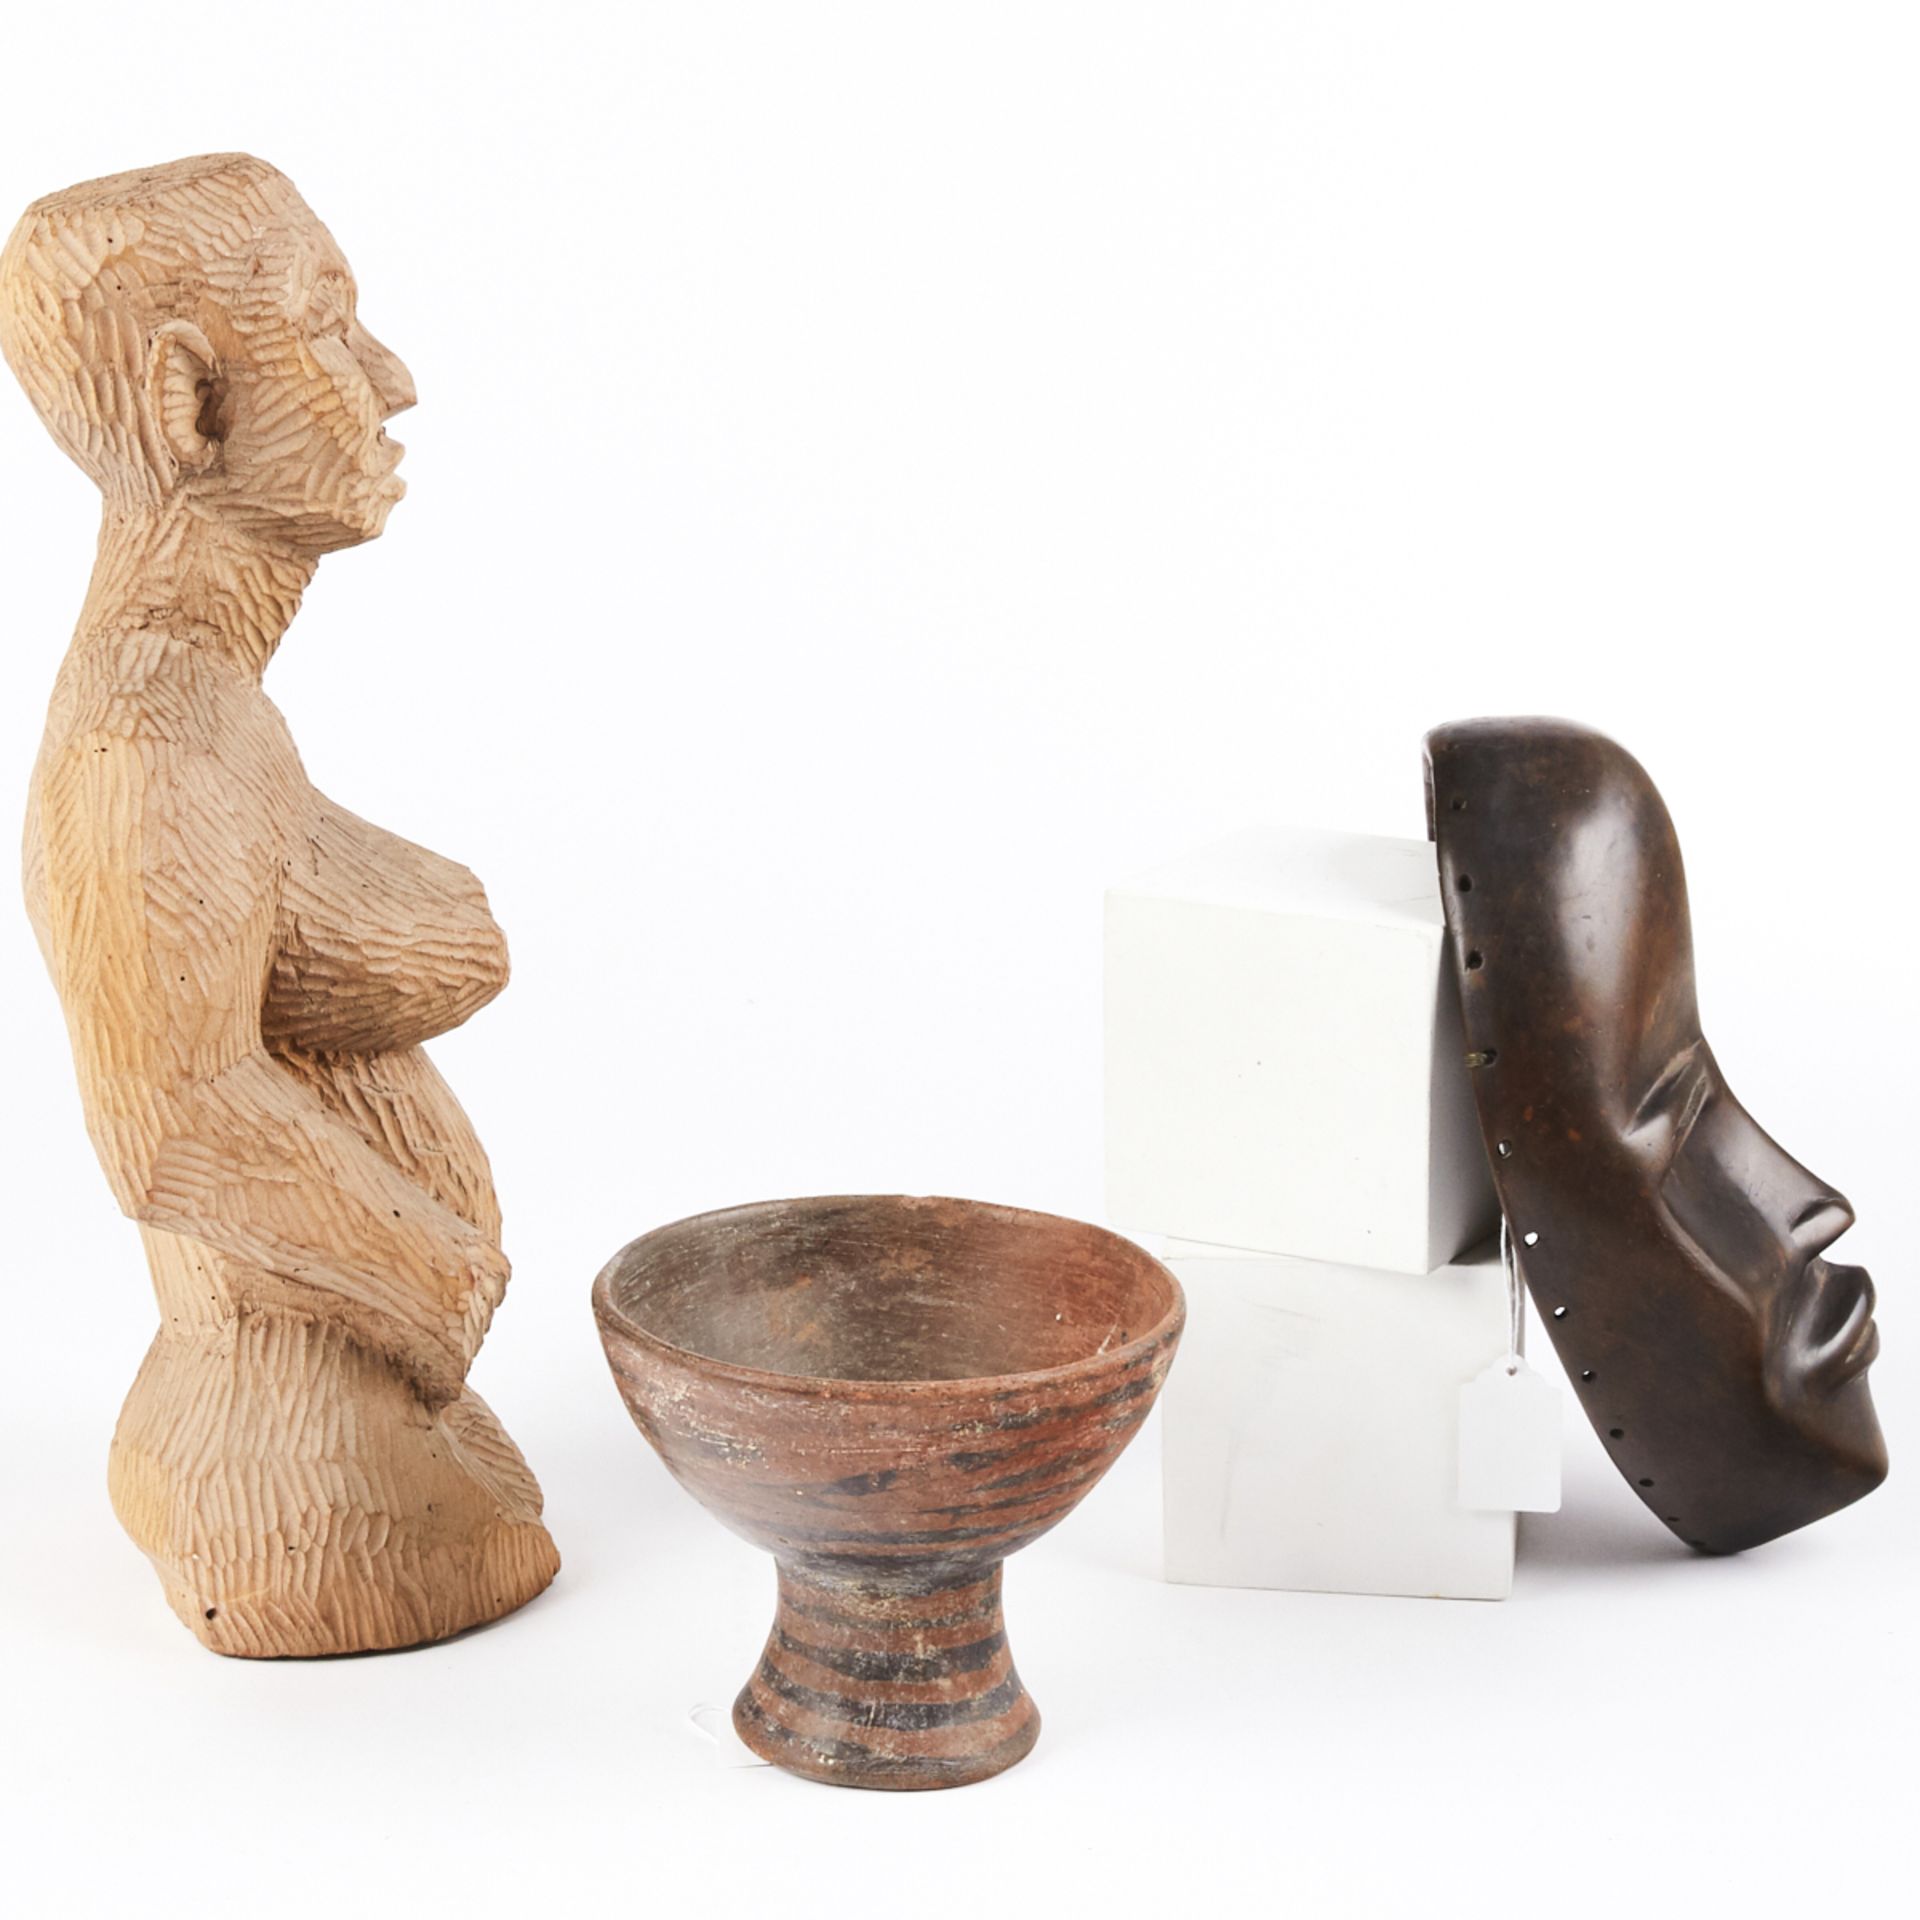 Grp: African Carved Wooden Objects - Mask Bowl Sculpture - Image 2 of 2